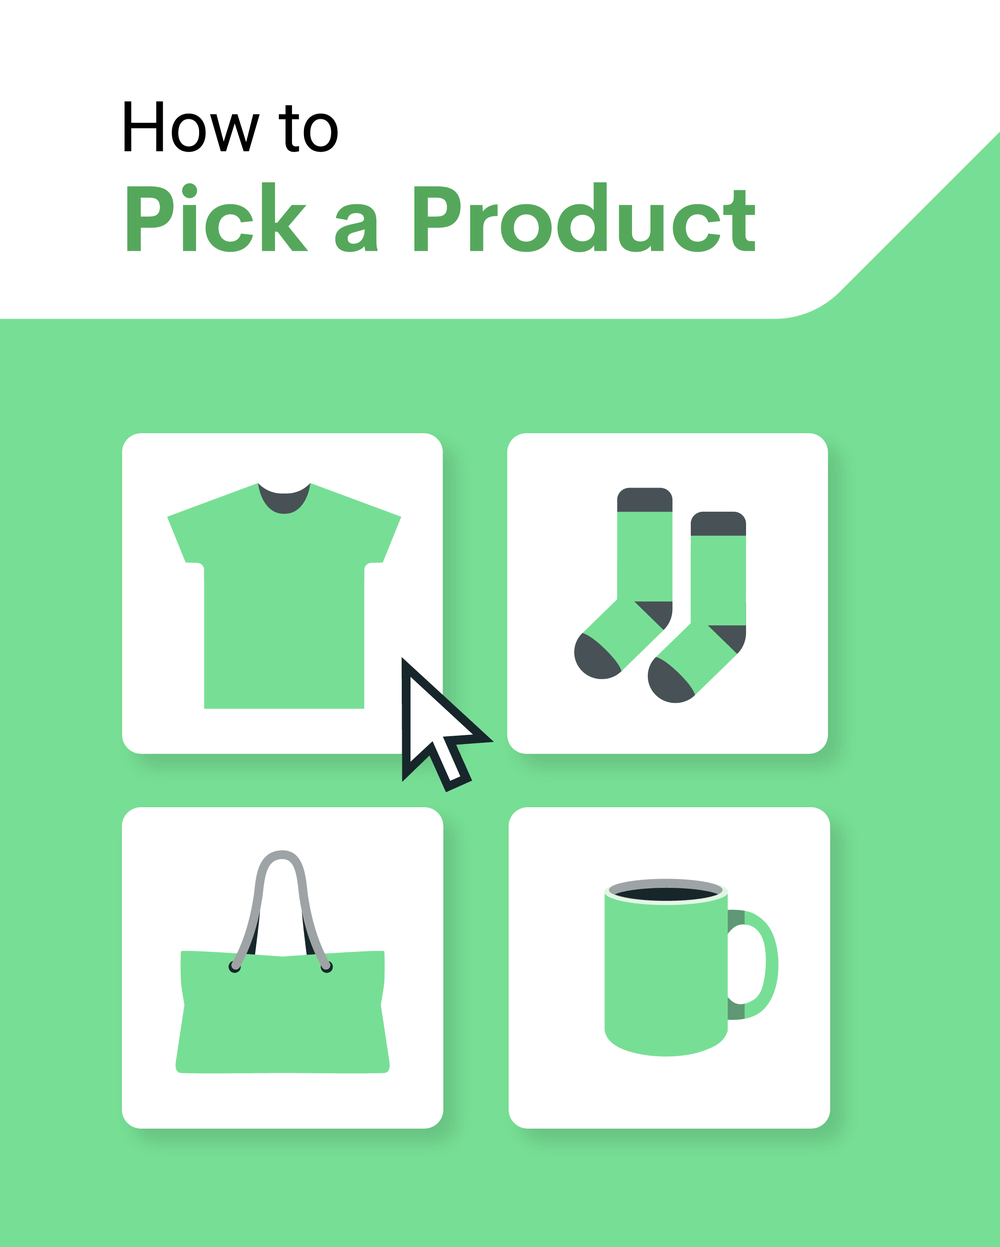 How to Pick a Product?